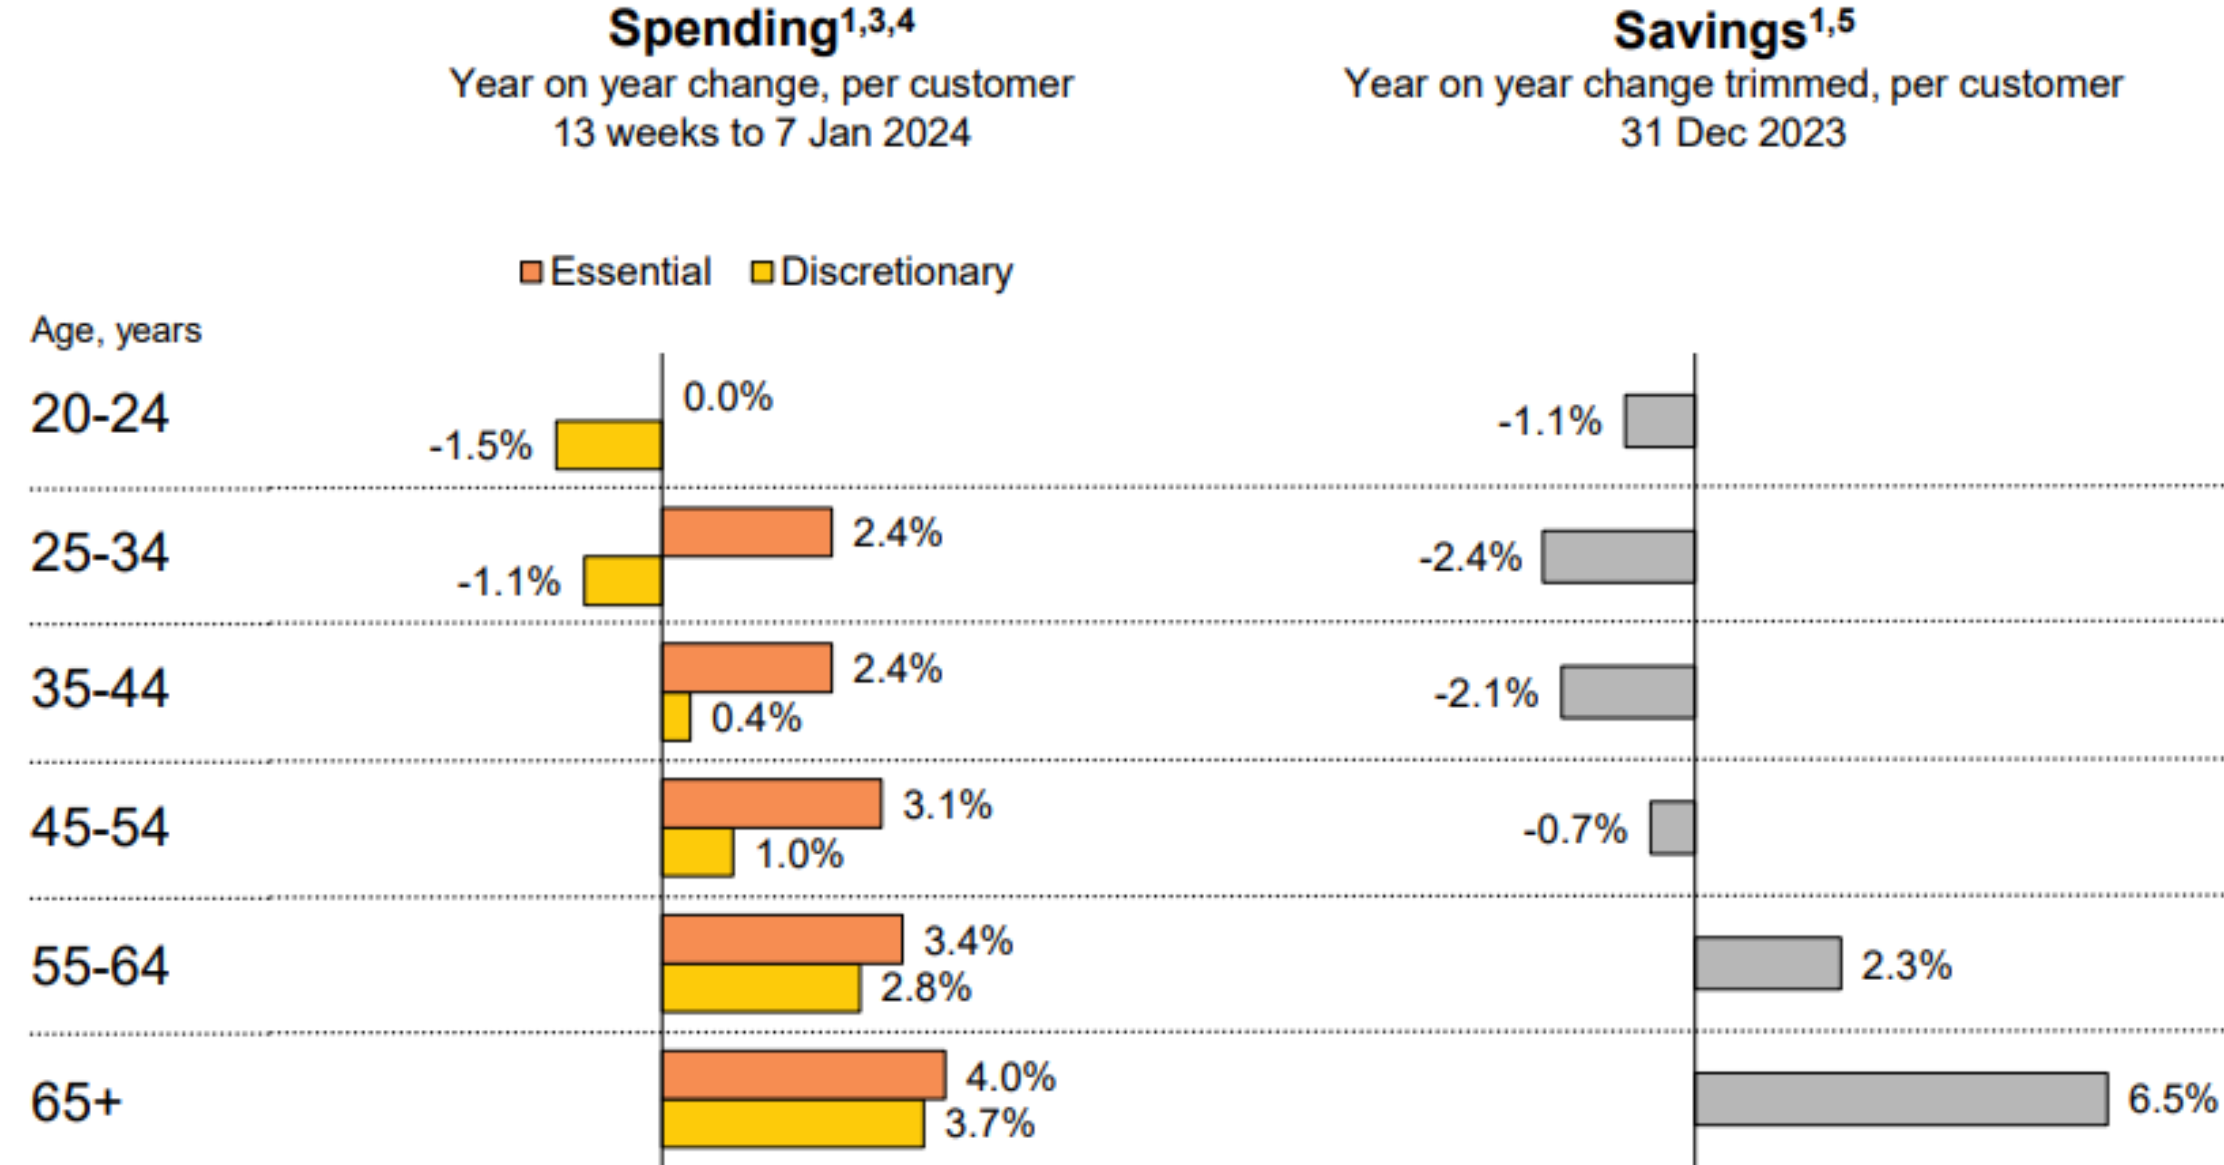 Spending and savings by age group